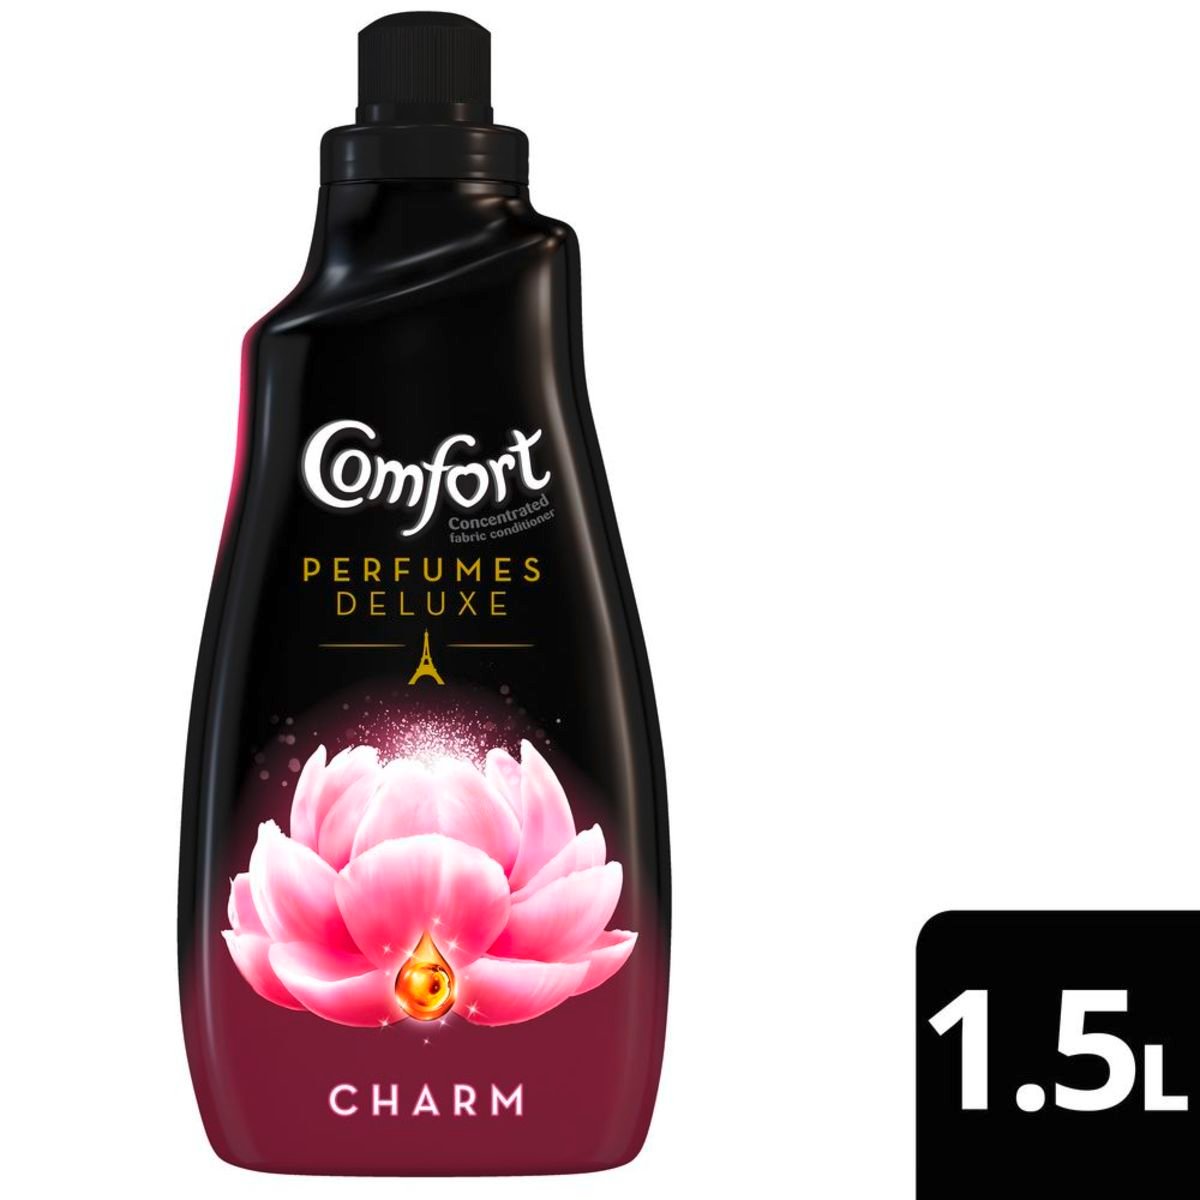 Comfort Perfumes Deluxe Concentrated Fabric Softener Charm 1.5Litre